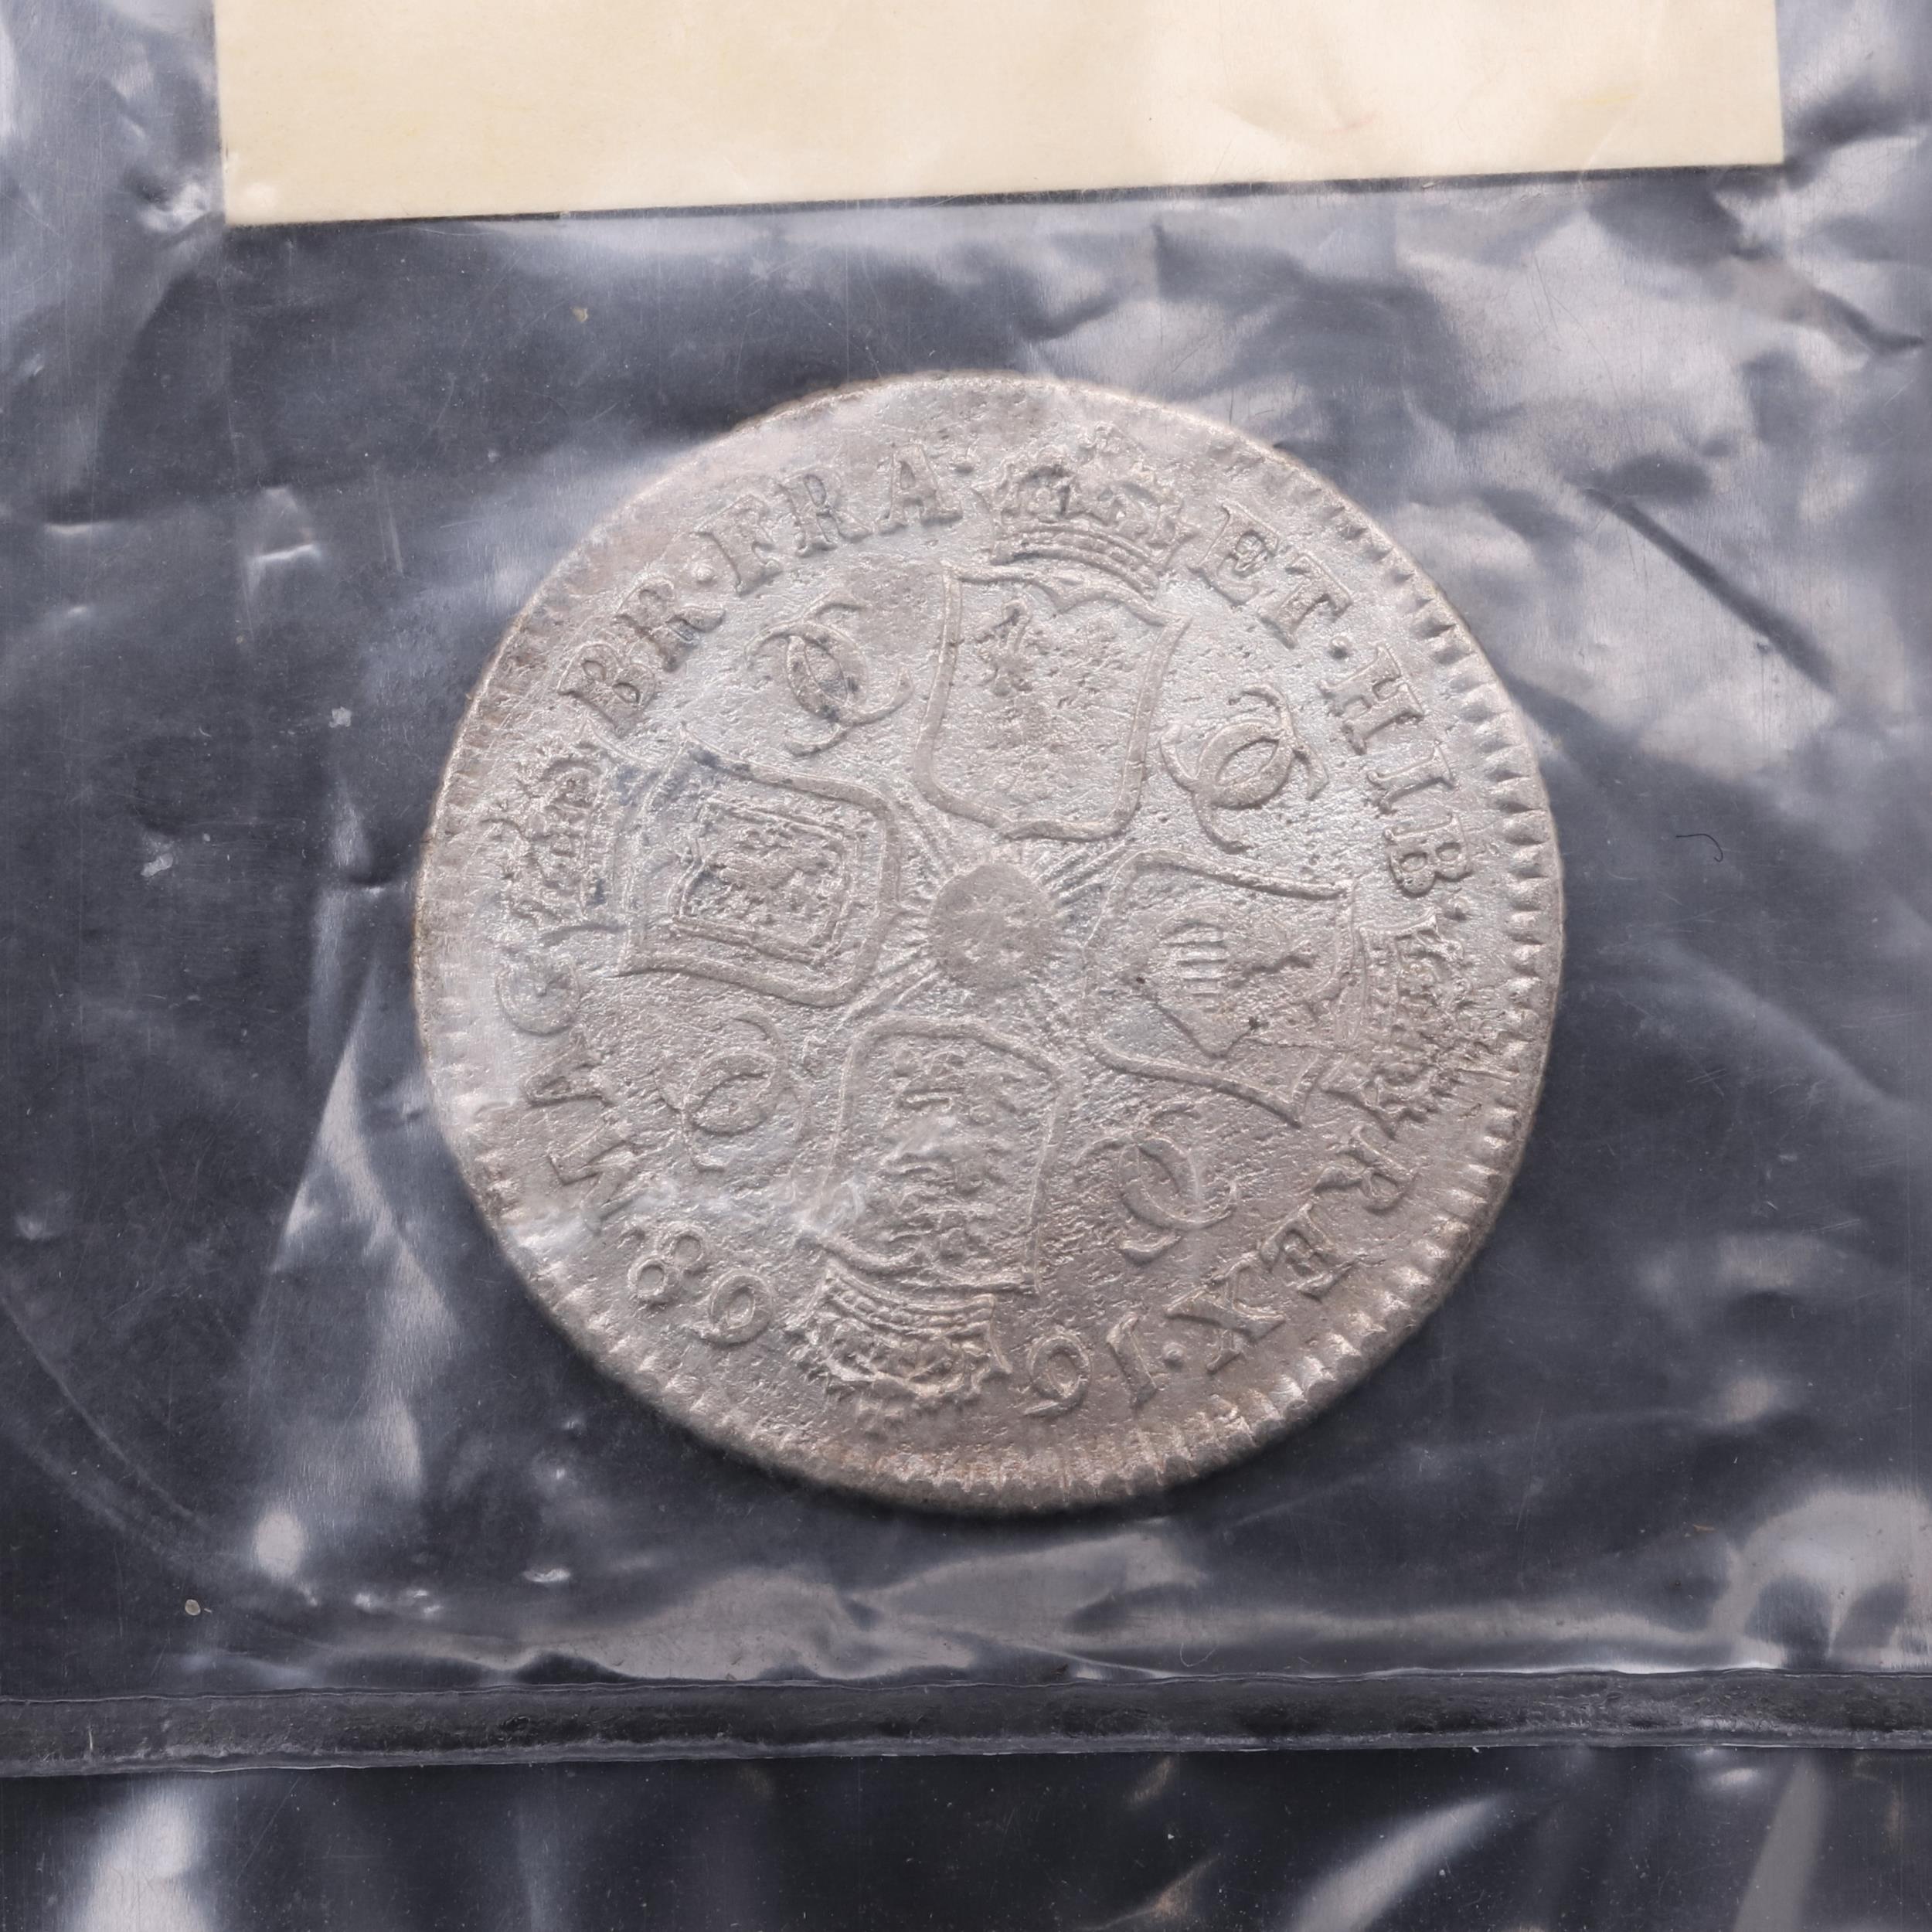 A CHARLES II SHILLING, 1668, FROM THE WRECK OF THE ASSOCIATION. - Image 2 of 3